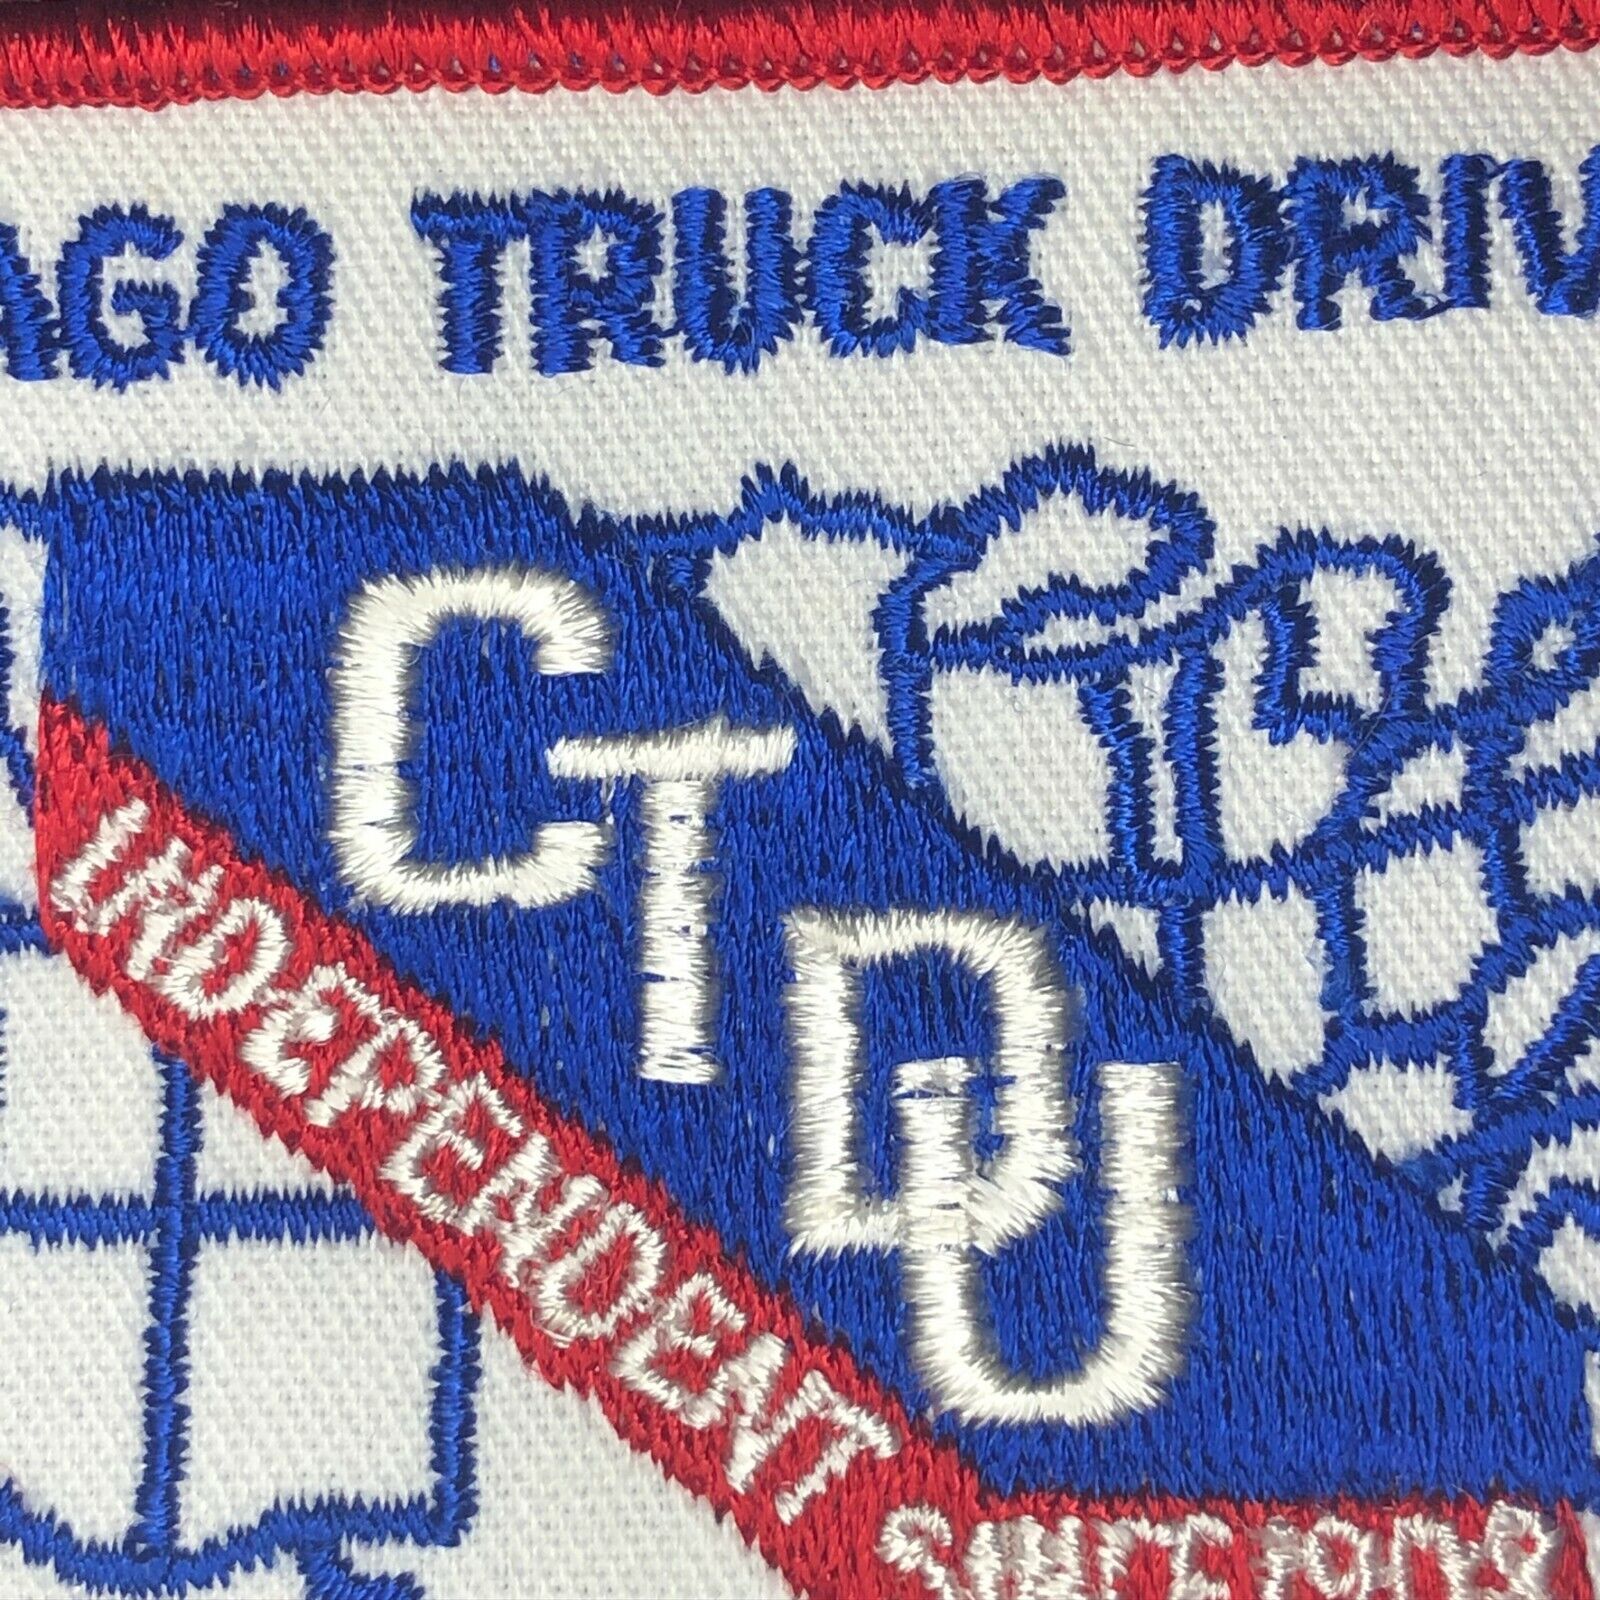 Vintage NOS Machine Stitched Embroidered Patch CTDU Chicago Truck Drivers Union 